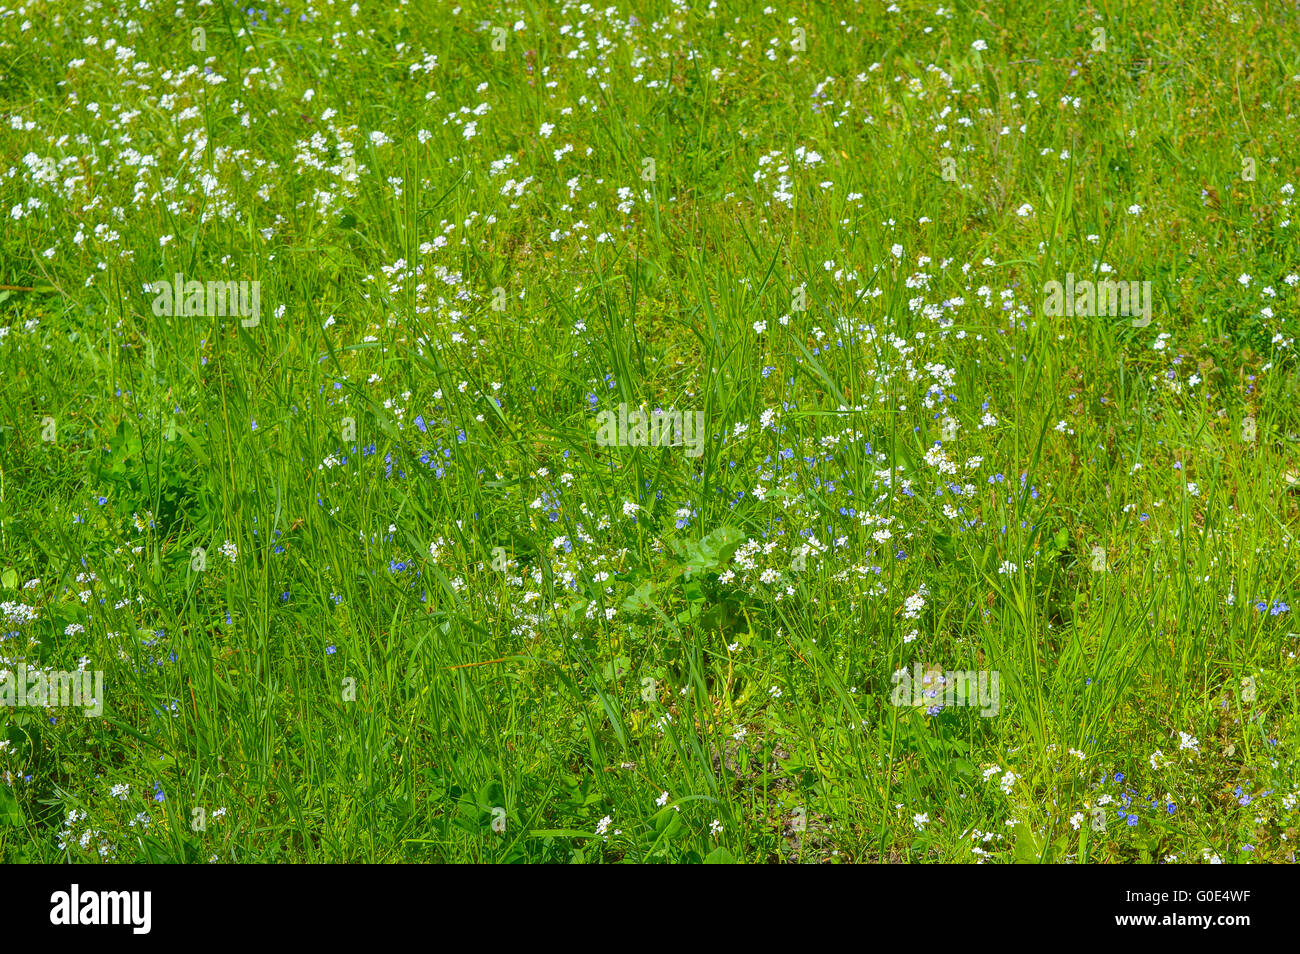 Green grass field and bright blue flowers Stock Photo